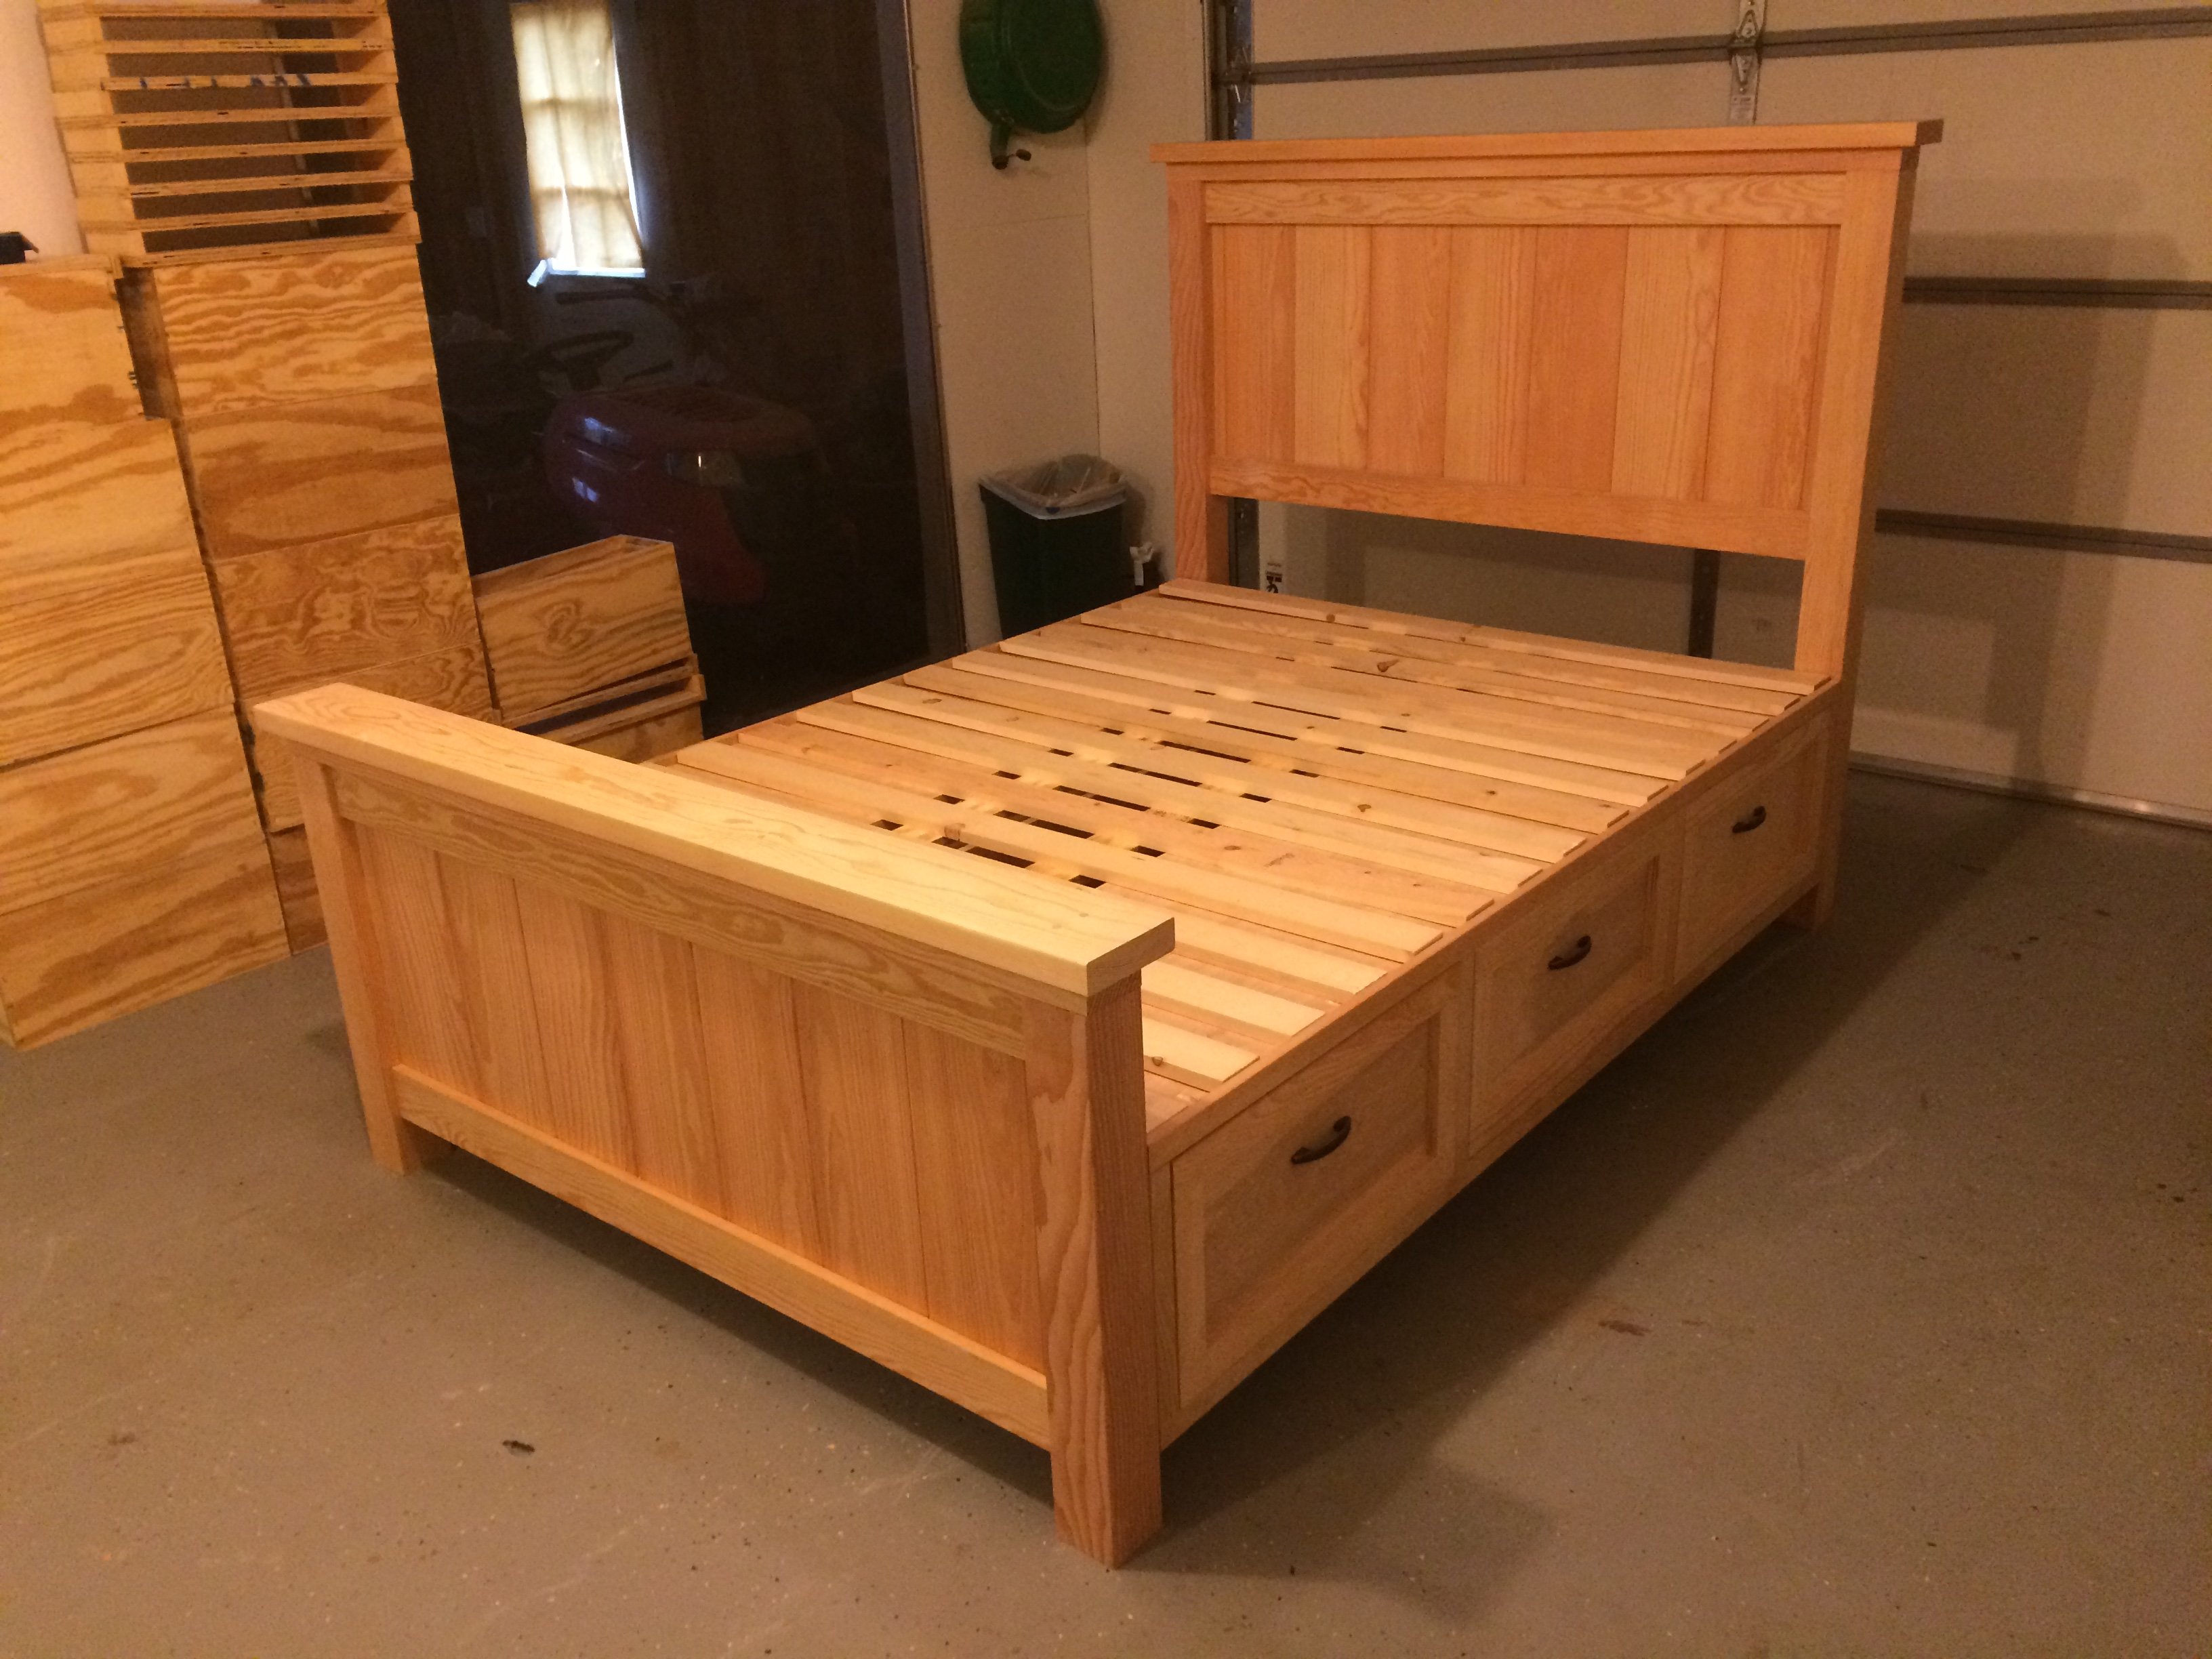 Farmhouse Storage Bed With Drawers, Diy Full Size Bed Frame With Storage Plans